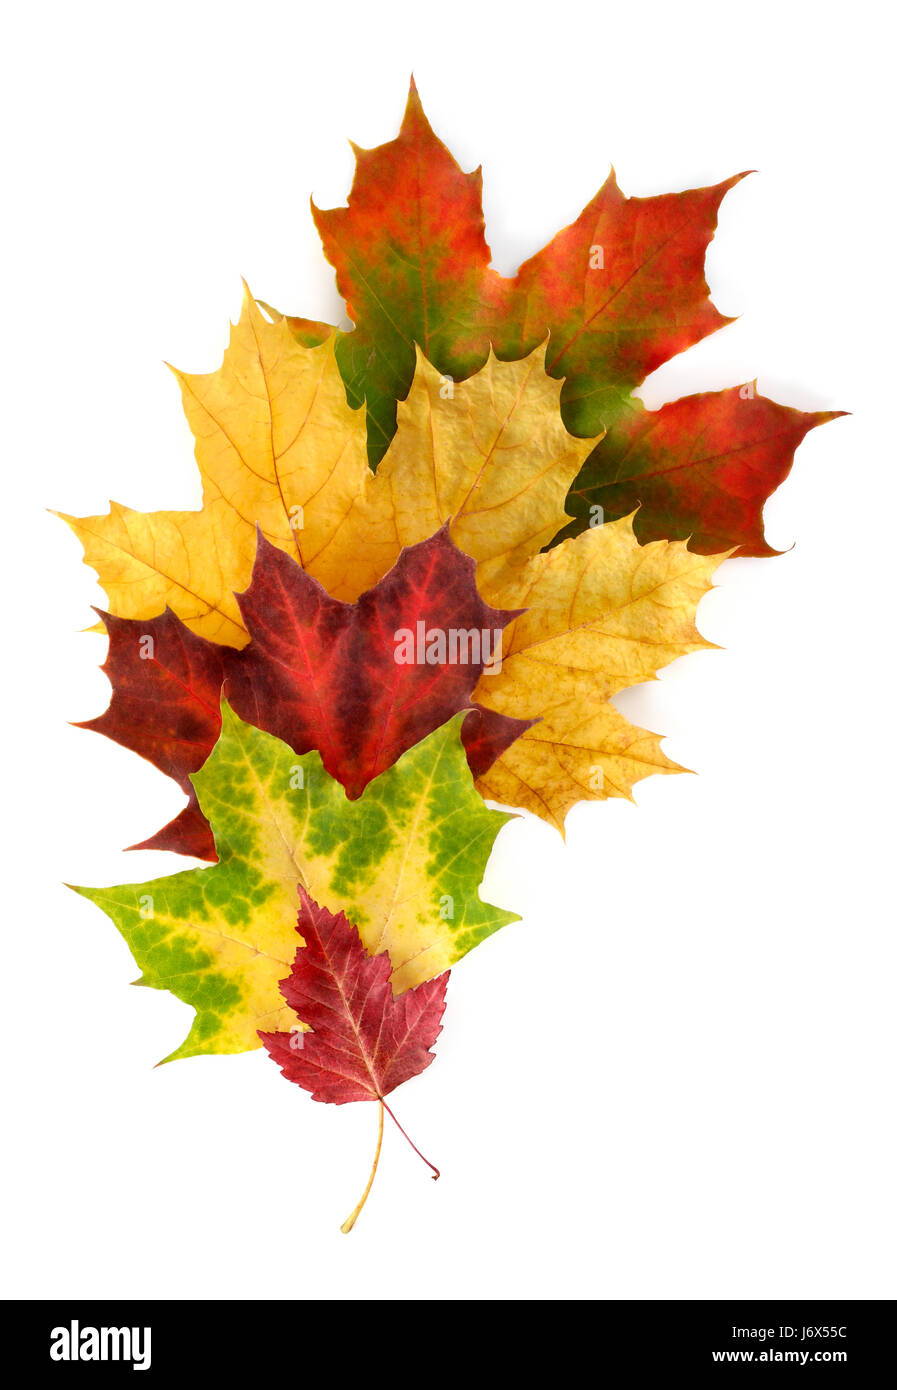 colorful composition with autumn leaves Stock Photo